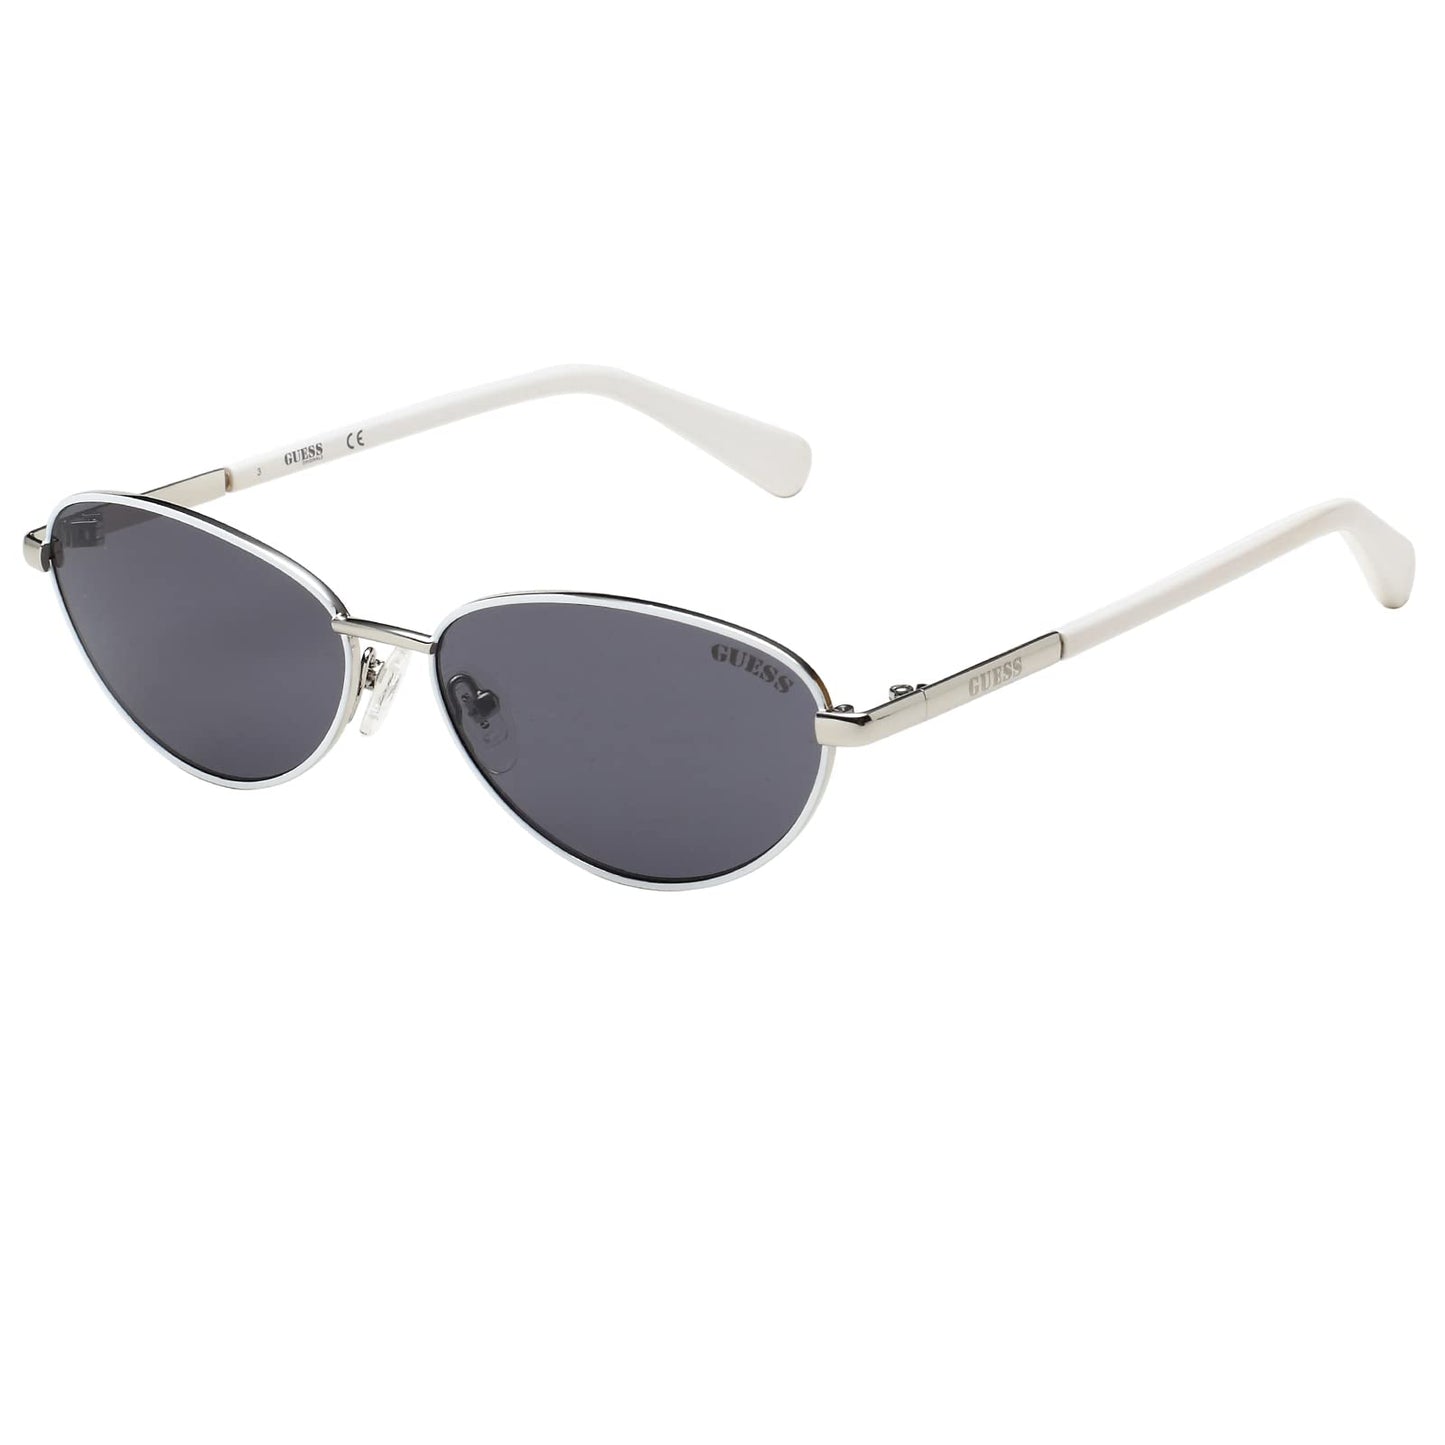 Guess Solid Oval Unisex Sunglasses - (GU8230 10A 57 S |57| Grey Color Lens)